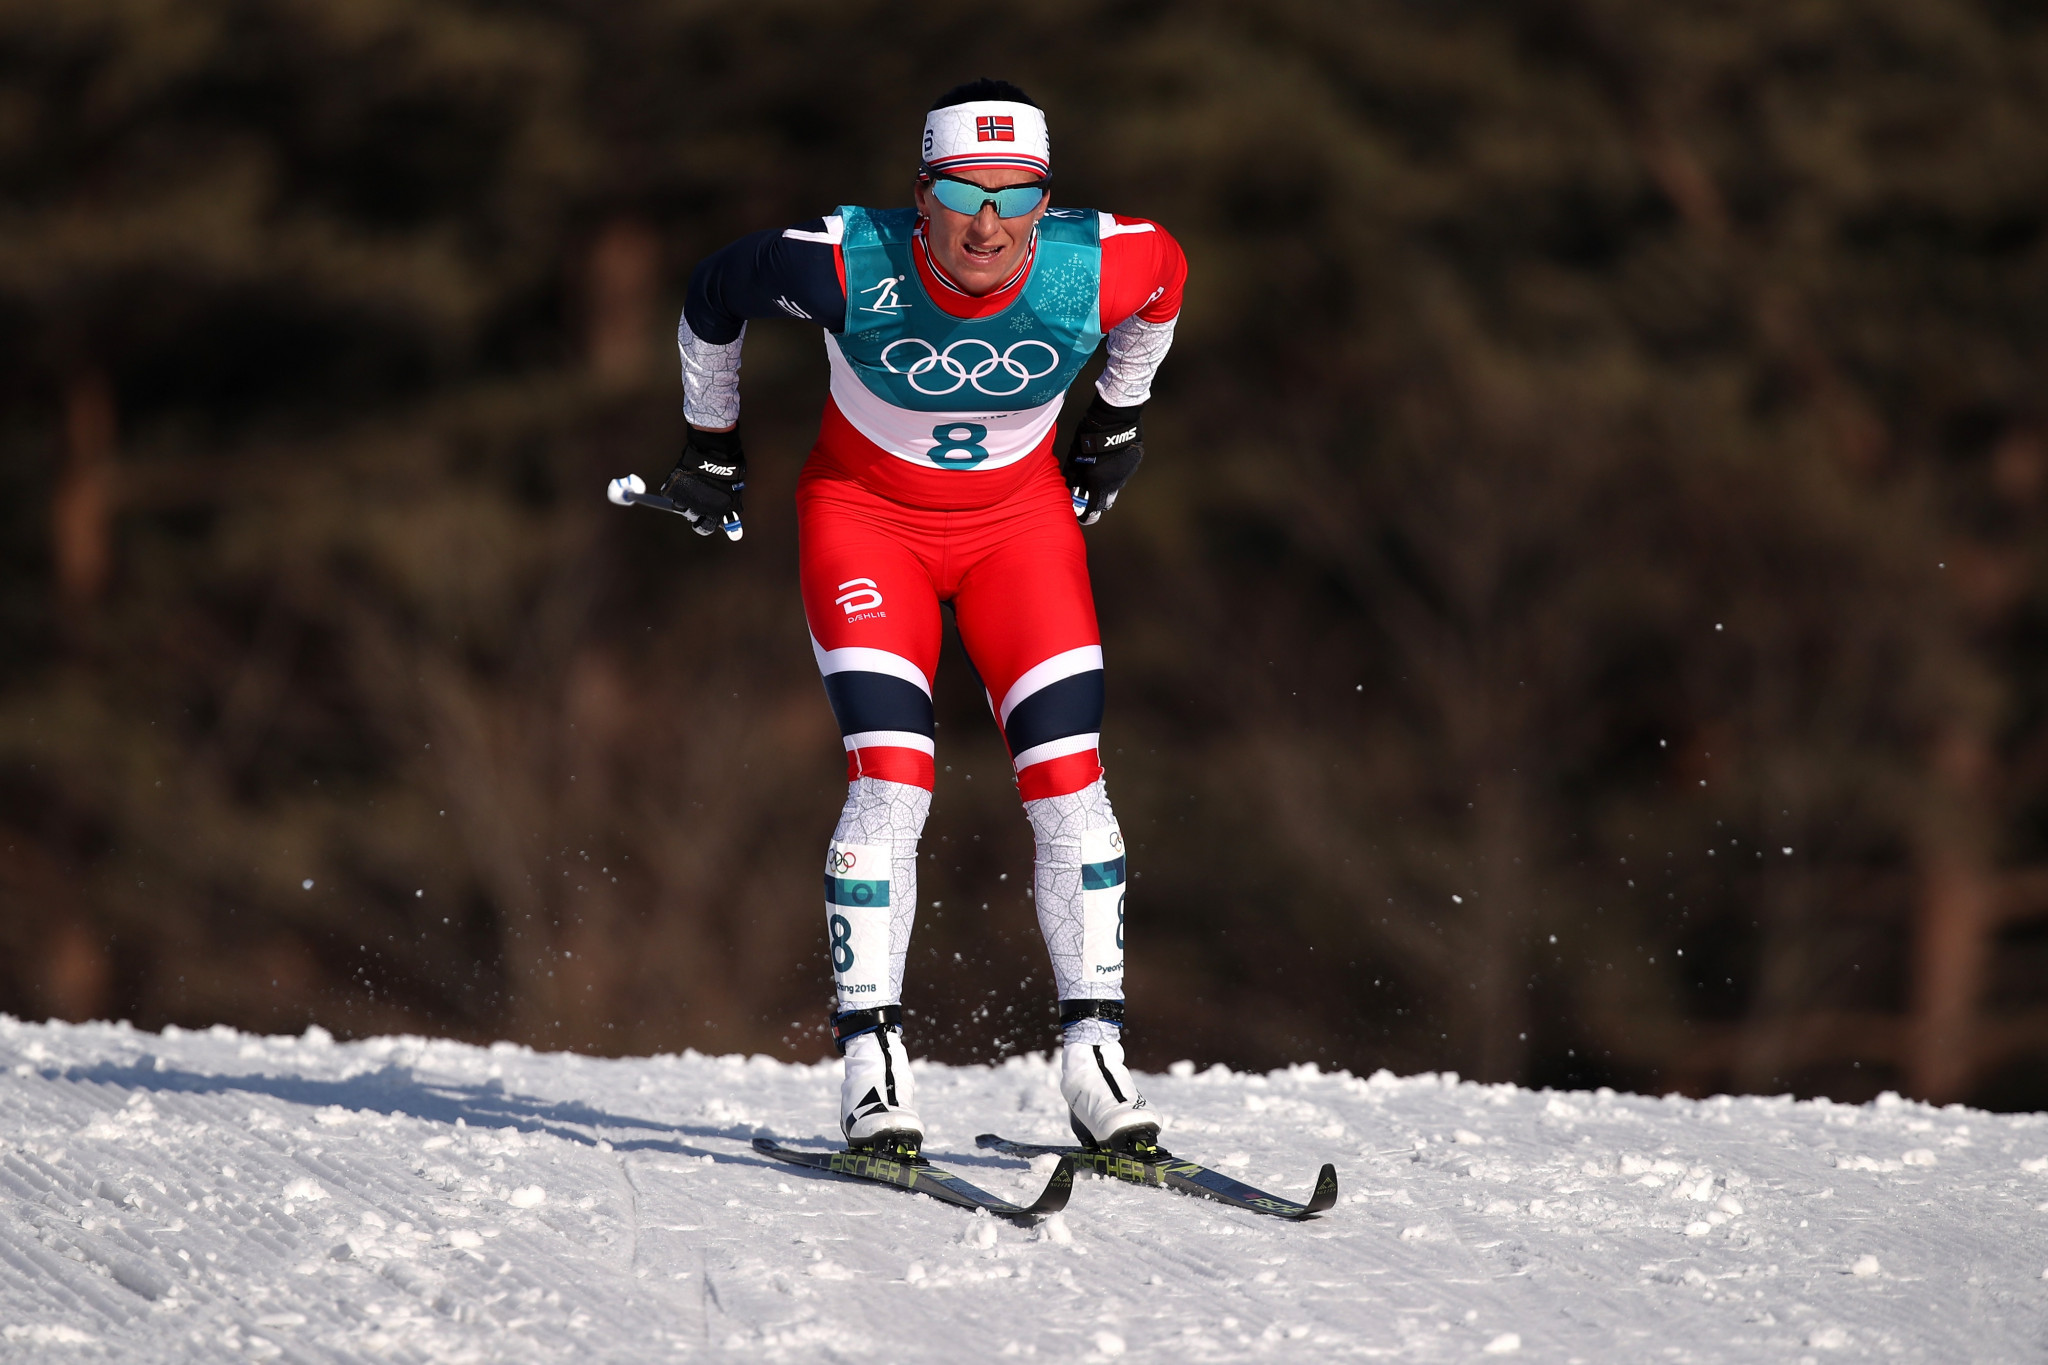 Norwegian legend Marit Bjørgen skied away from the rest of the field to secure the gold medal in dominant fashion ©Getty Images